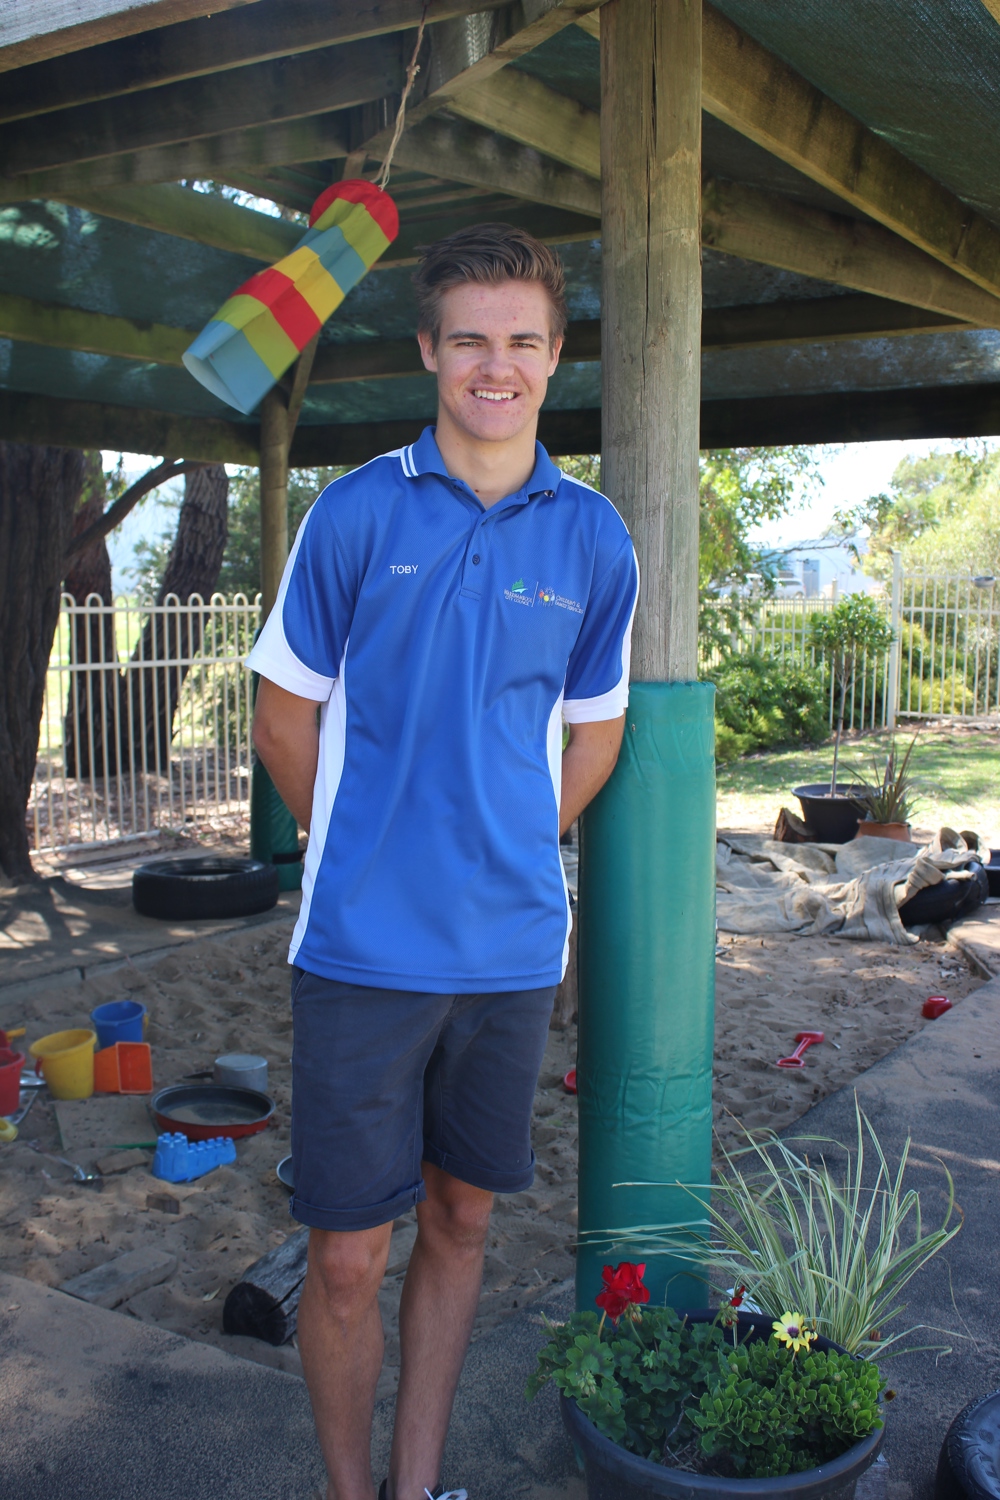 Toby Bishop working at Warrnambool child care centres